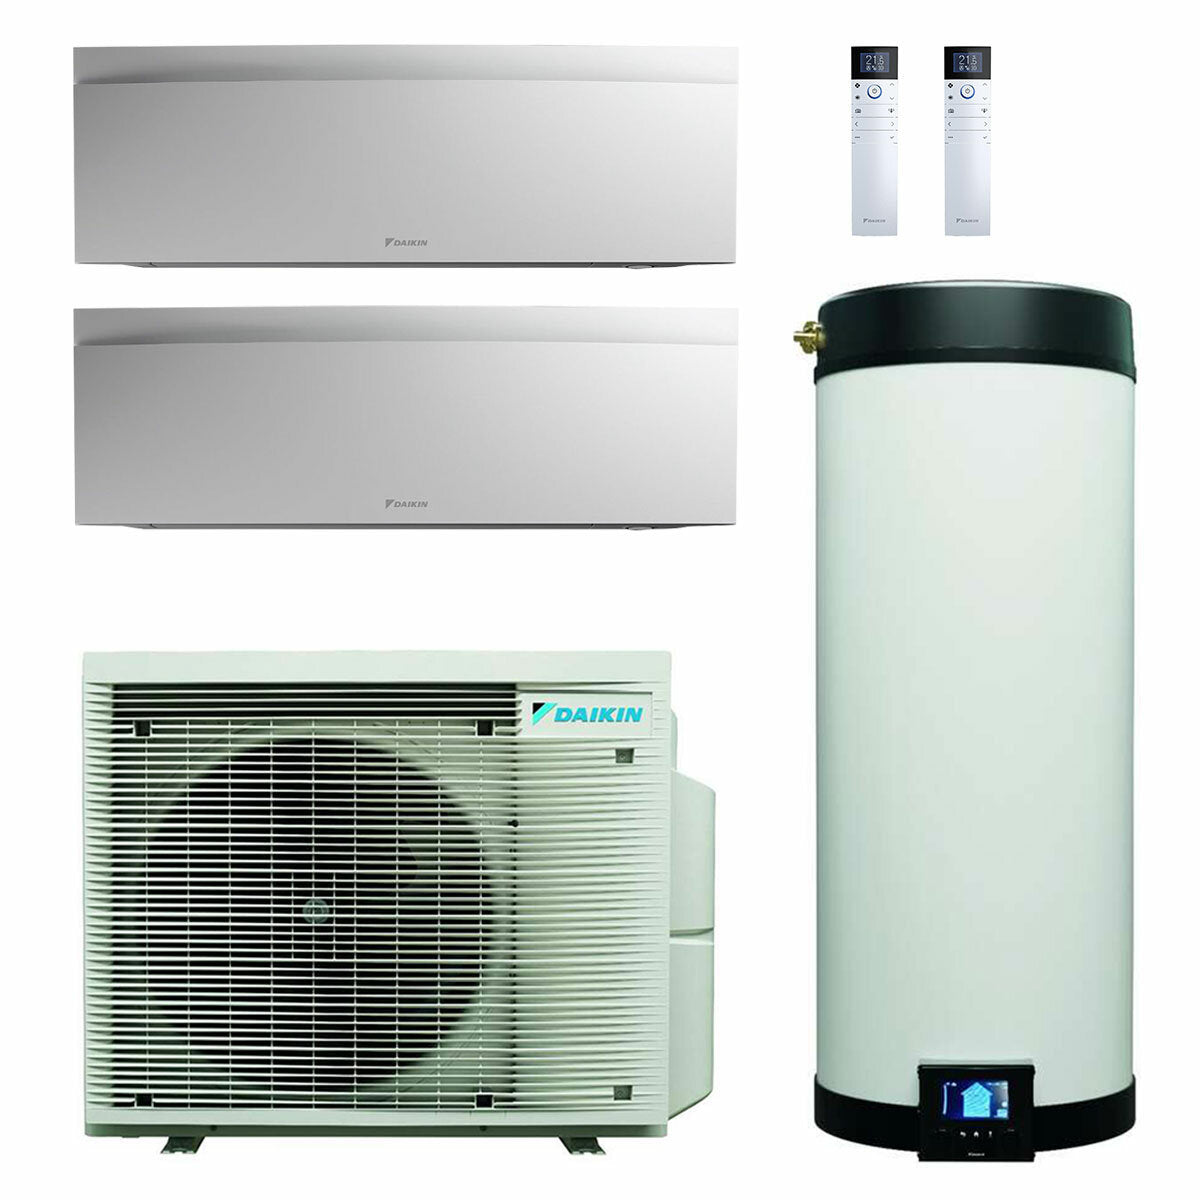 Daikin Multi+ dual split air conditioning system and domestic hot water - Indoor units Emura 3 white 12000+12000 BTU - Tank 120 l